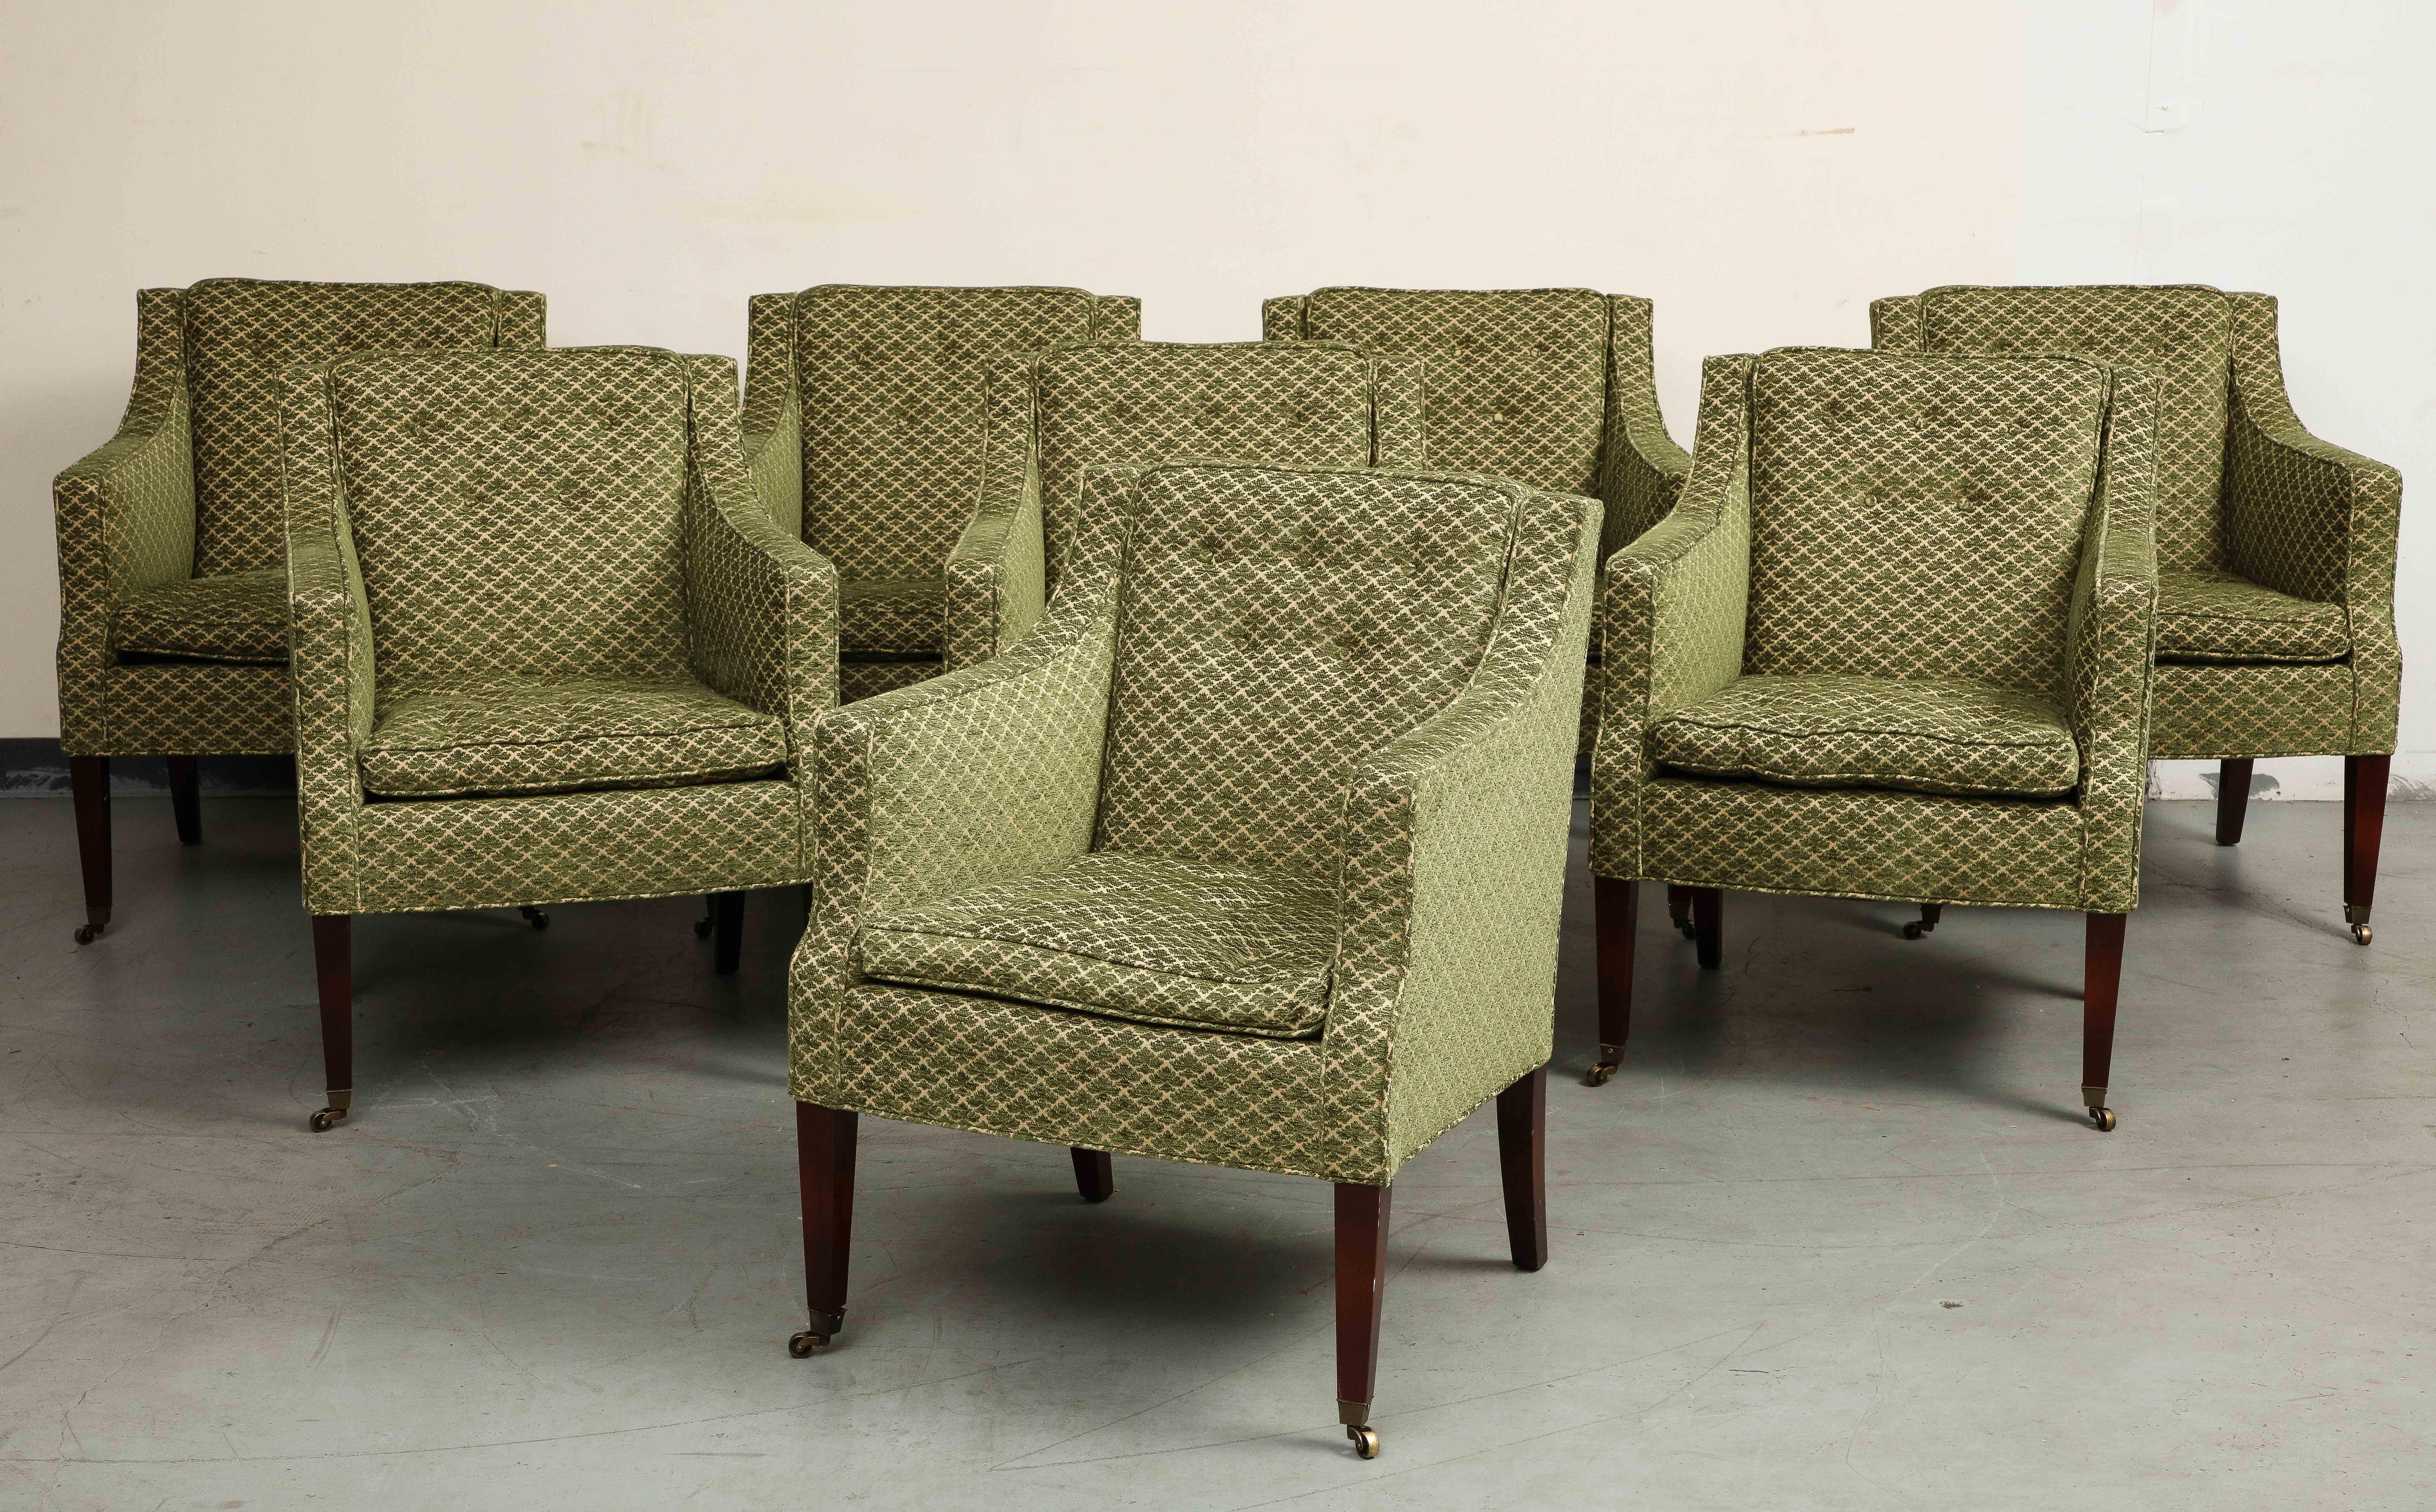 A set of eight (8) George III Late Regency style upholstered armchairs, each with square upholstered frames with down swept upholstered arms on four tapering square mahogany legs on casters. Upholstered in a deep green leaf patterned strie velours /